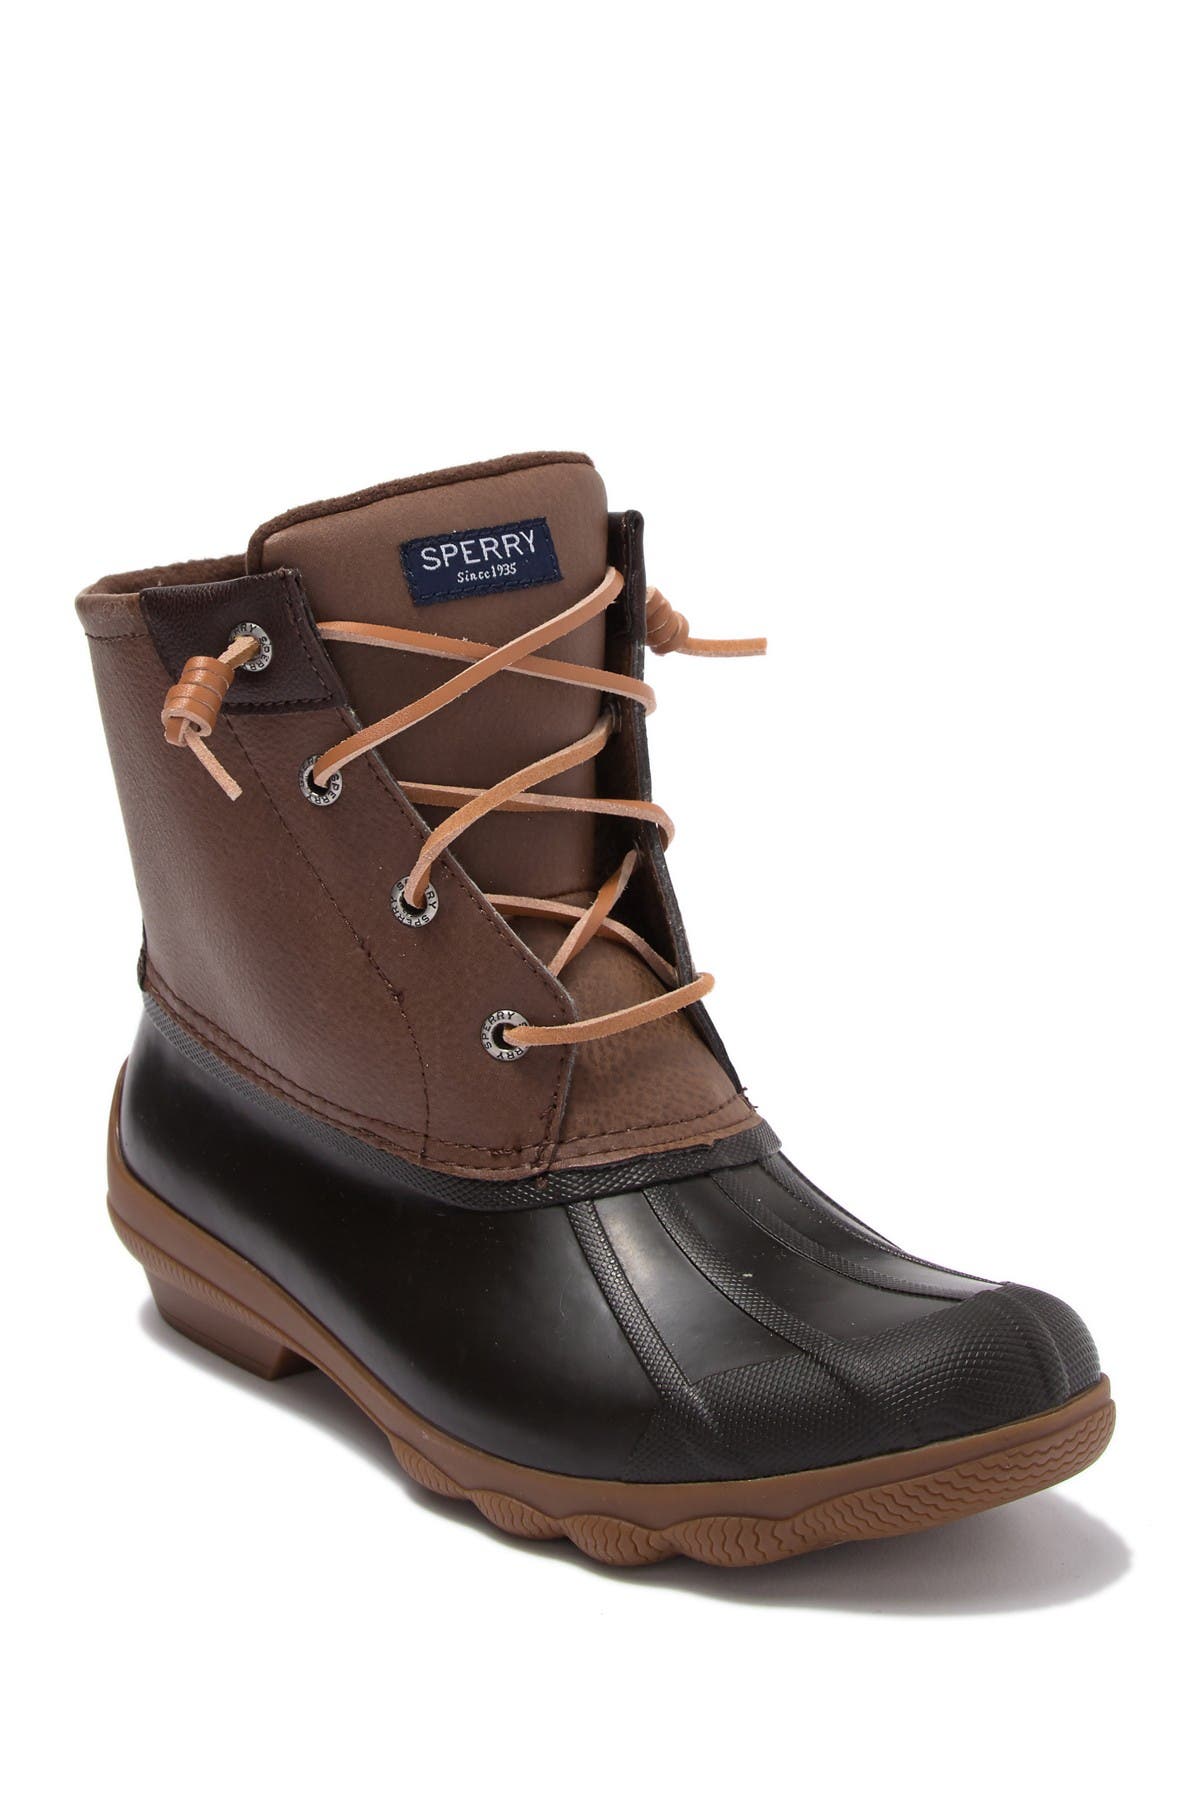 brooks brothers duck boots